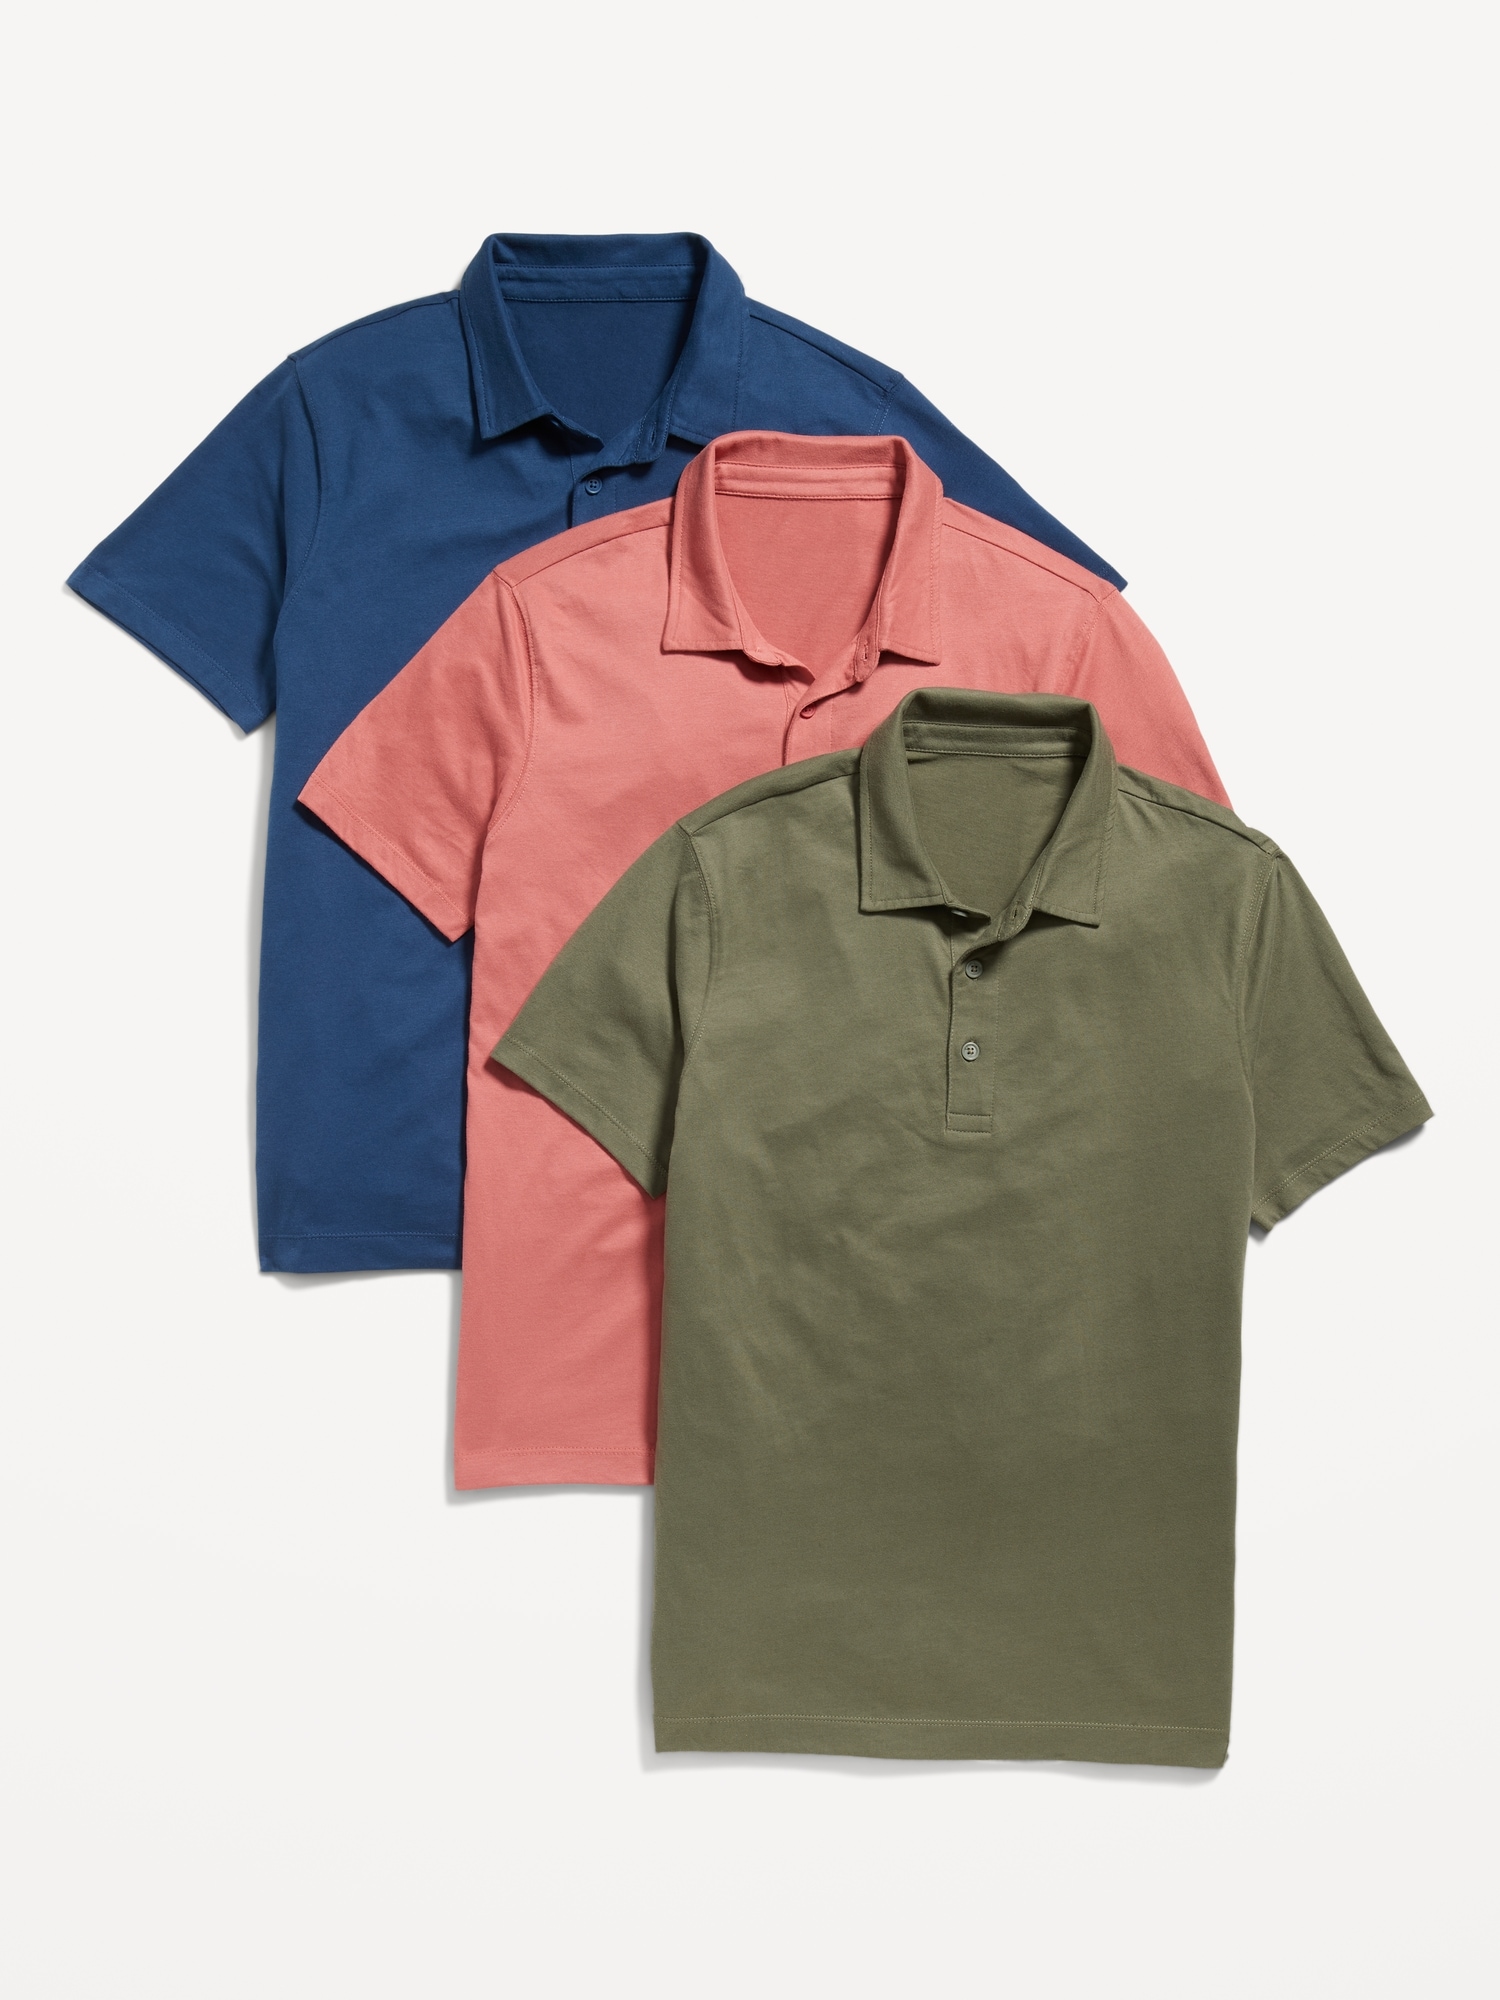 Classic Fit Jersey Polo Men